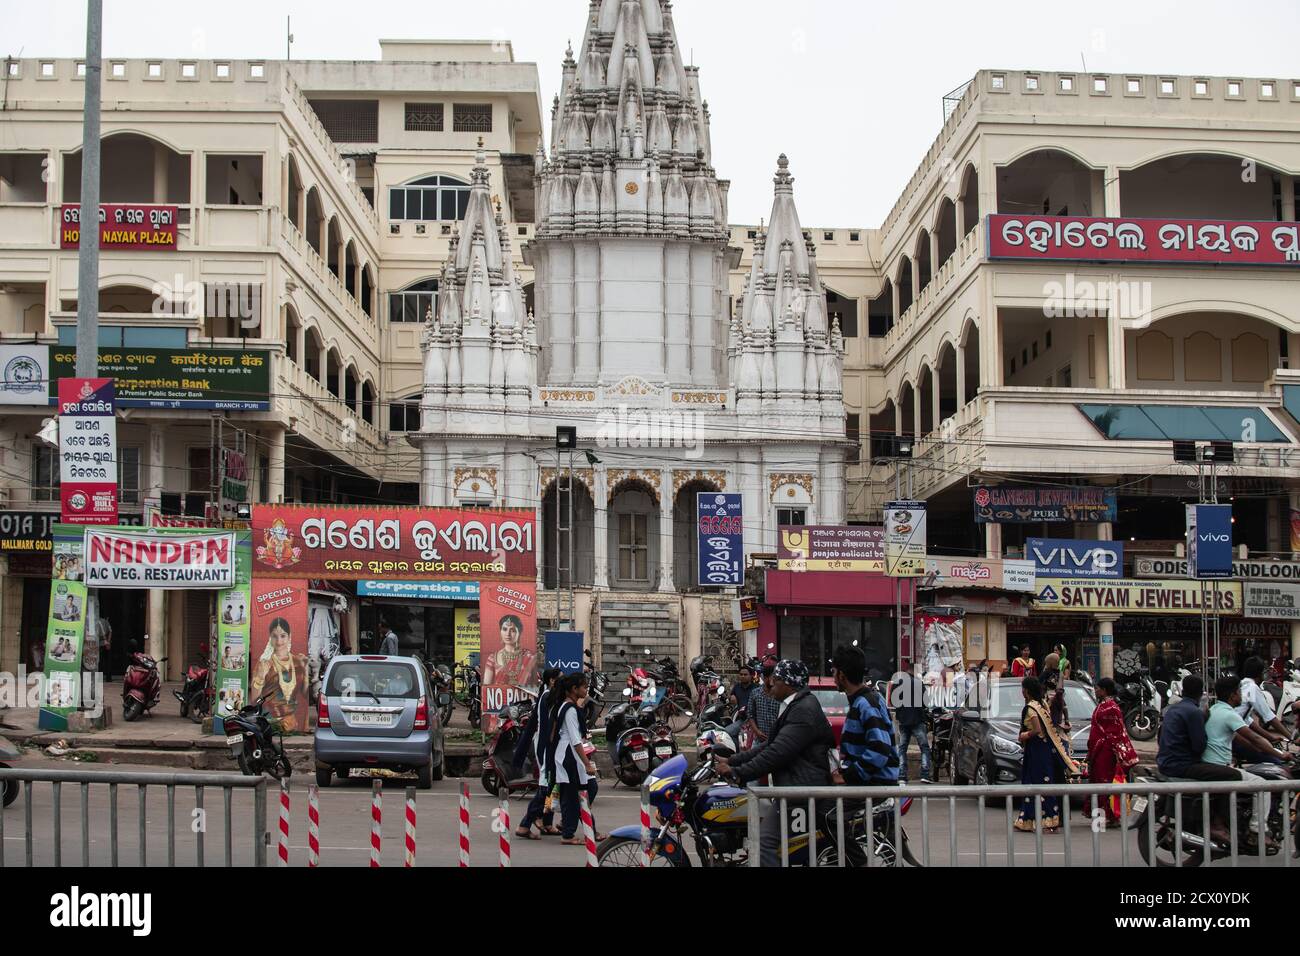 Puri, India - February 3, 2020: Street view of traffic in front of a small white hindu temple close to Jagannath on February 3, 2020 in Puri, India Stock Photo